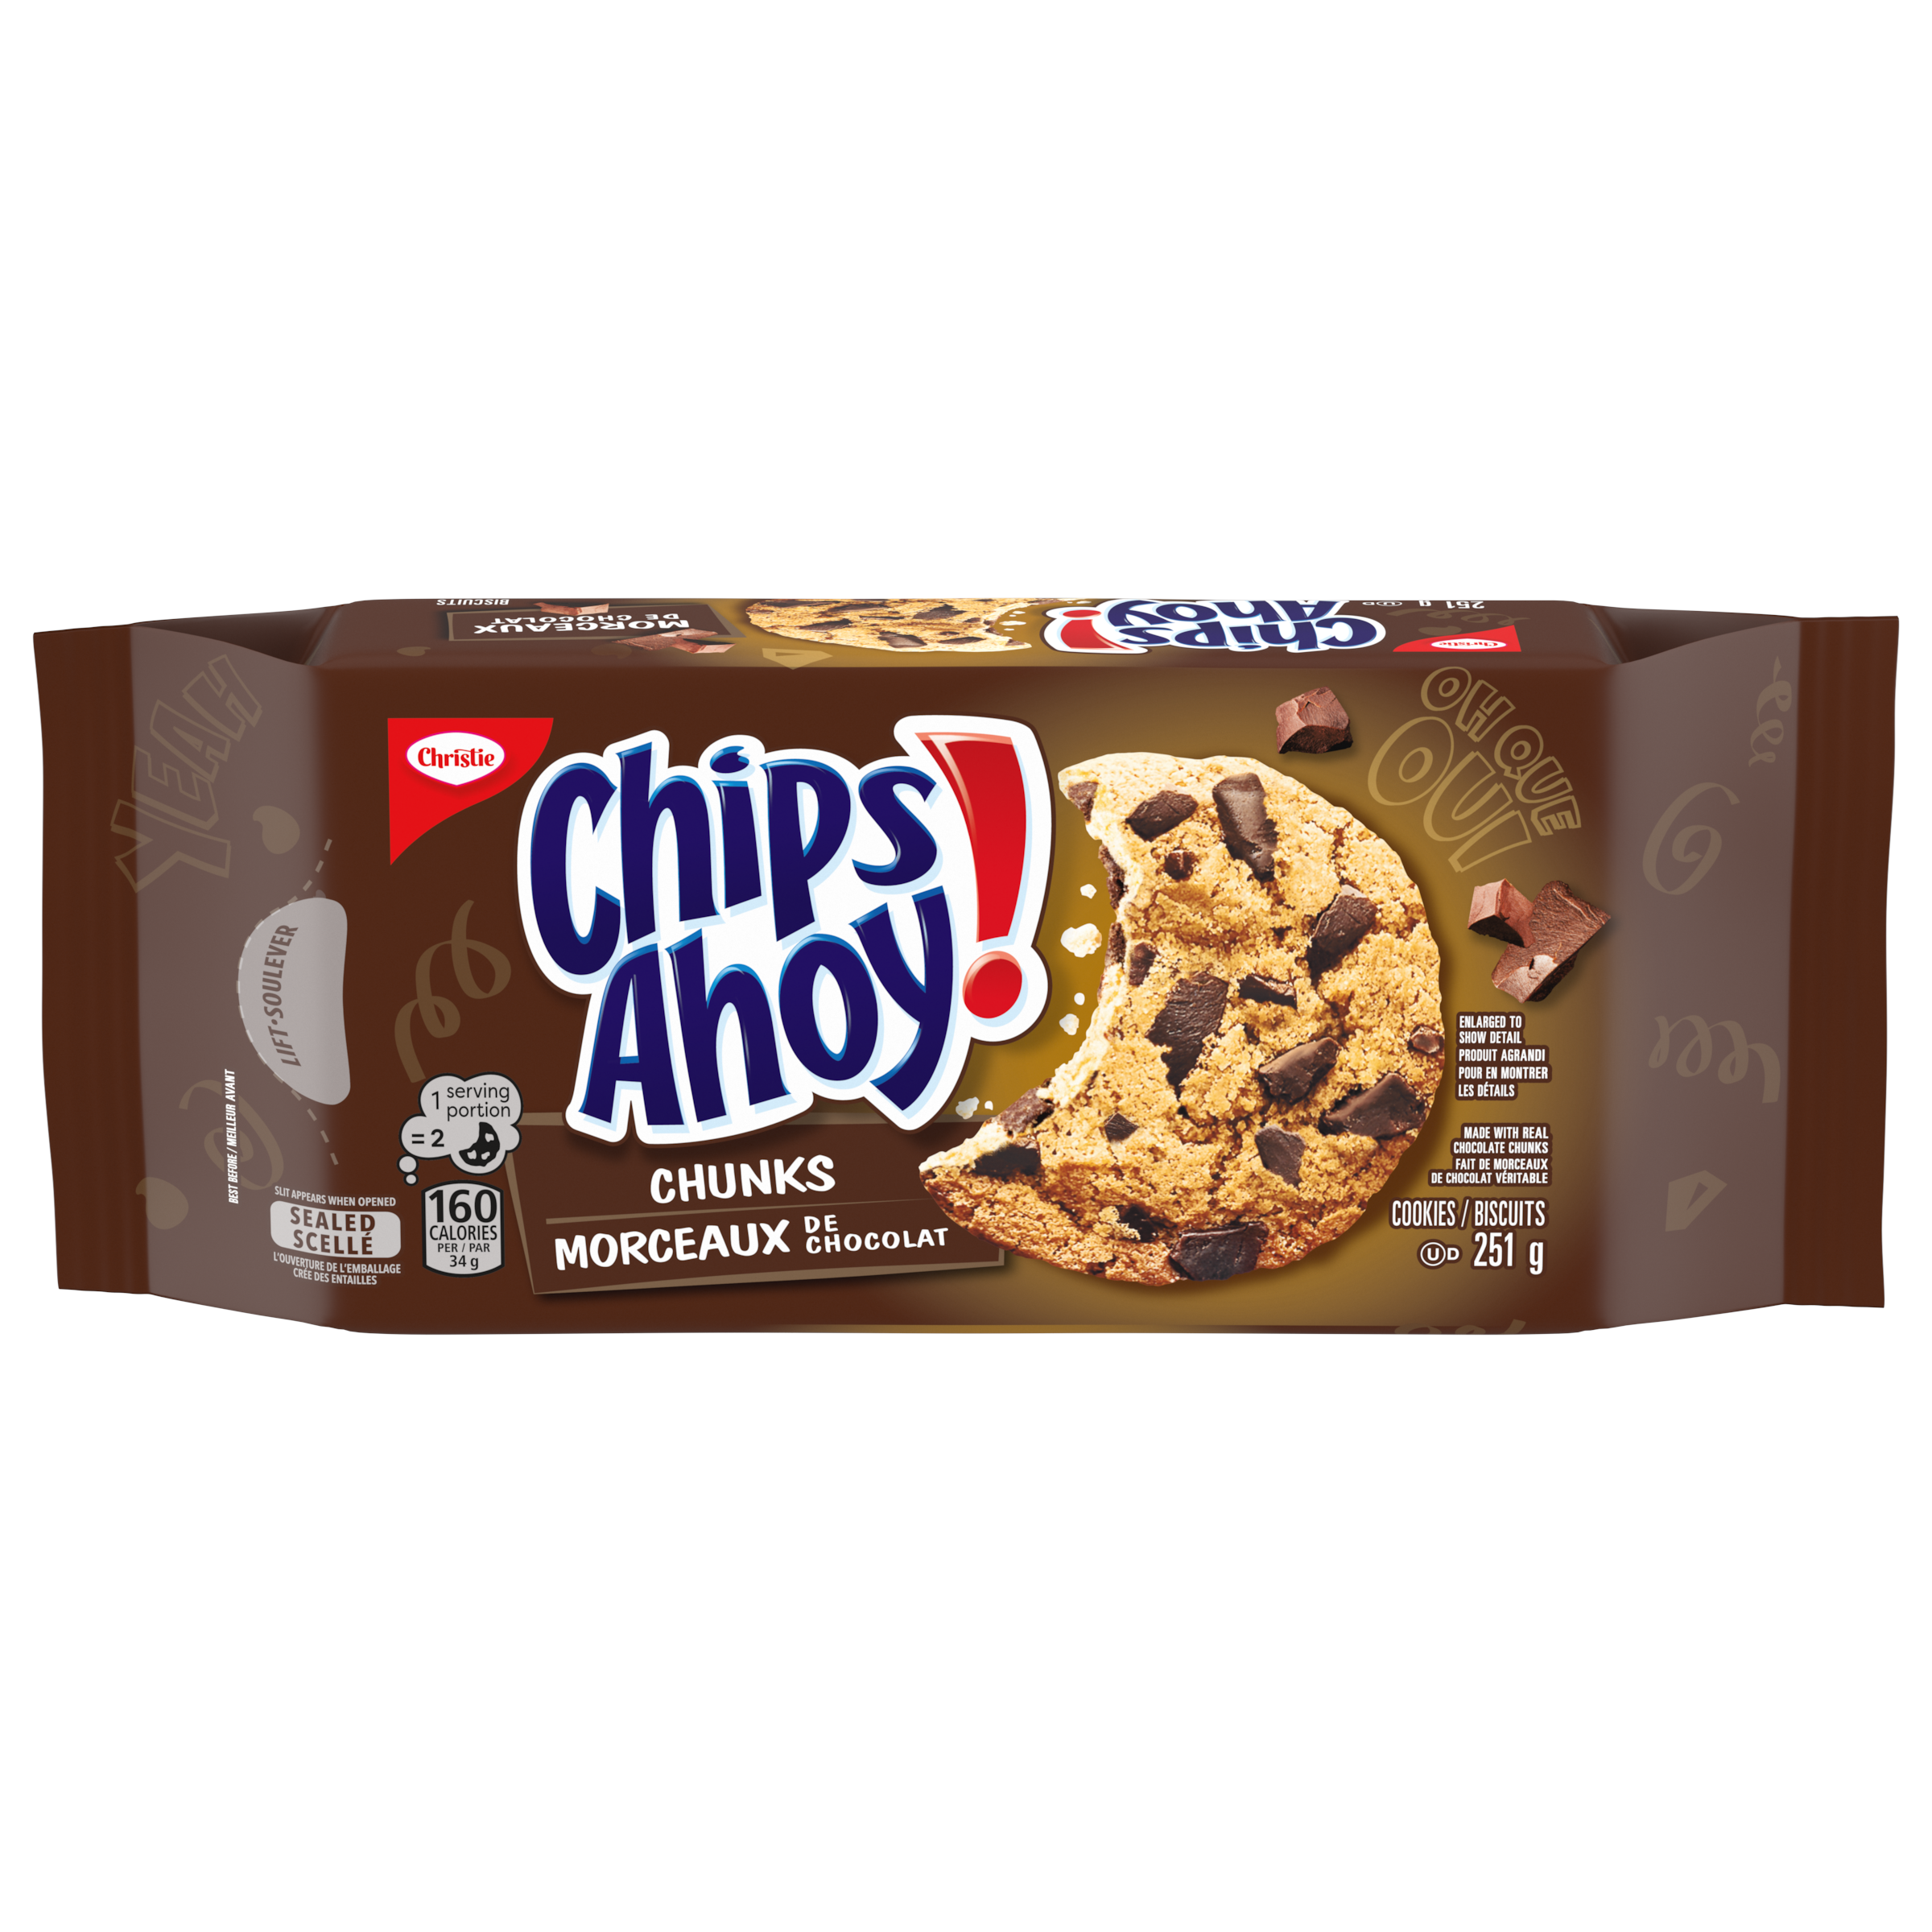 CHIPS AHOY! Chunks Chocolate Chip Cookies 251g-0